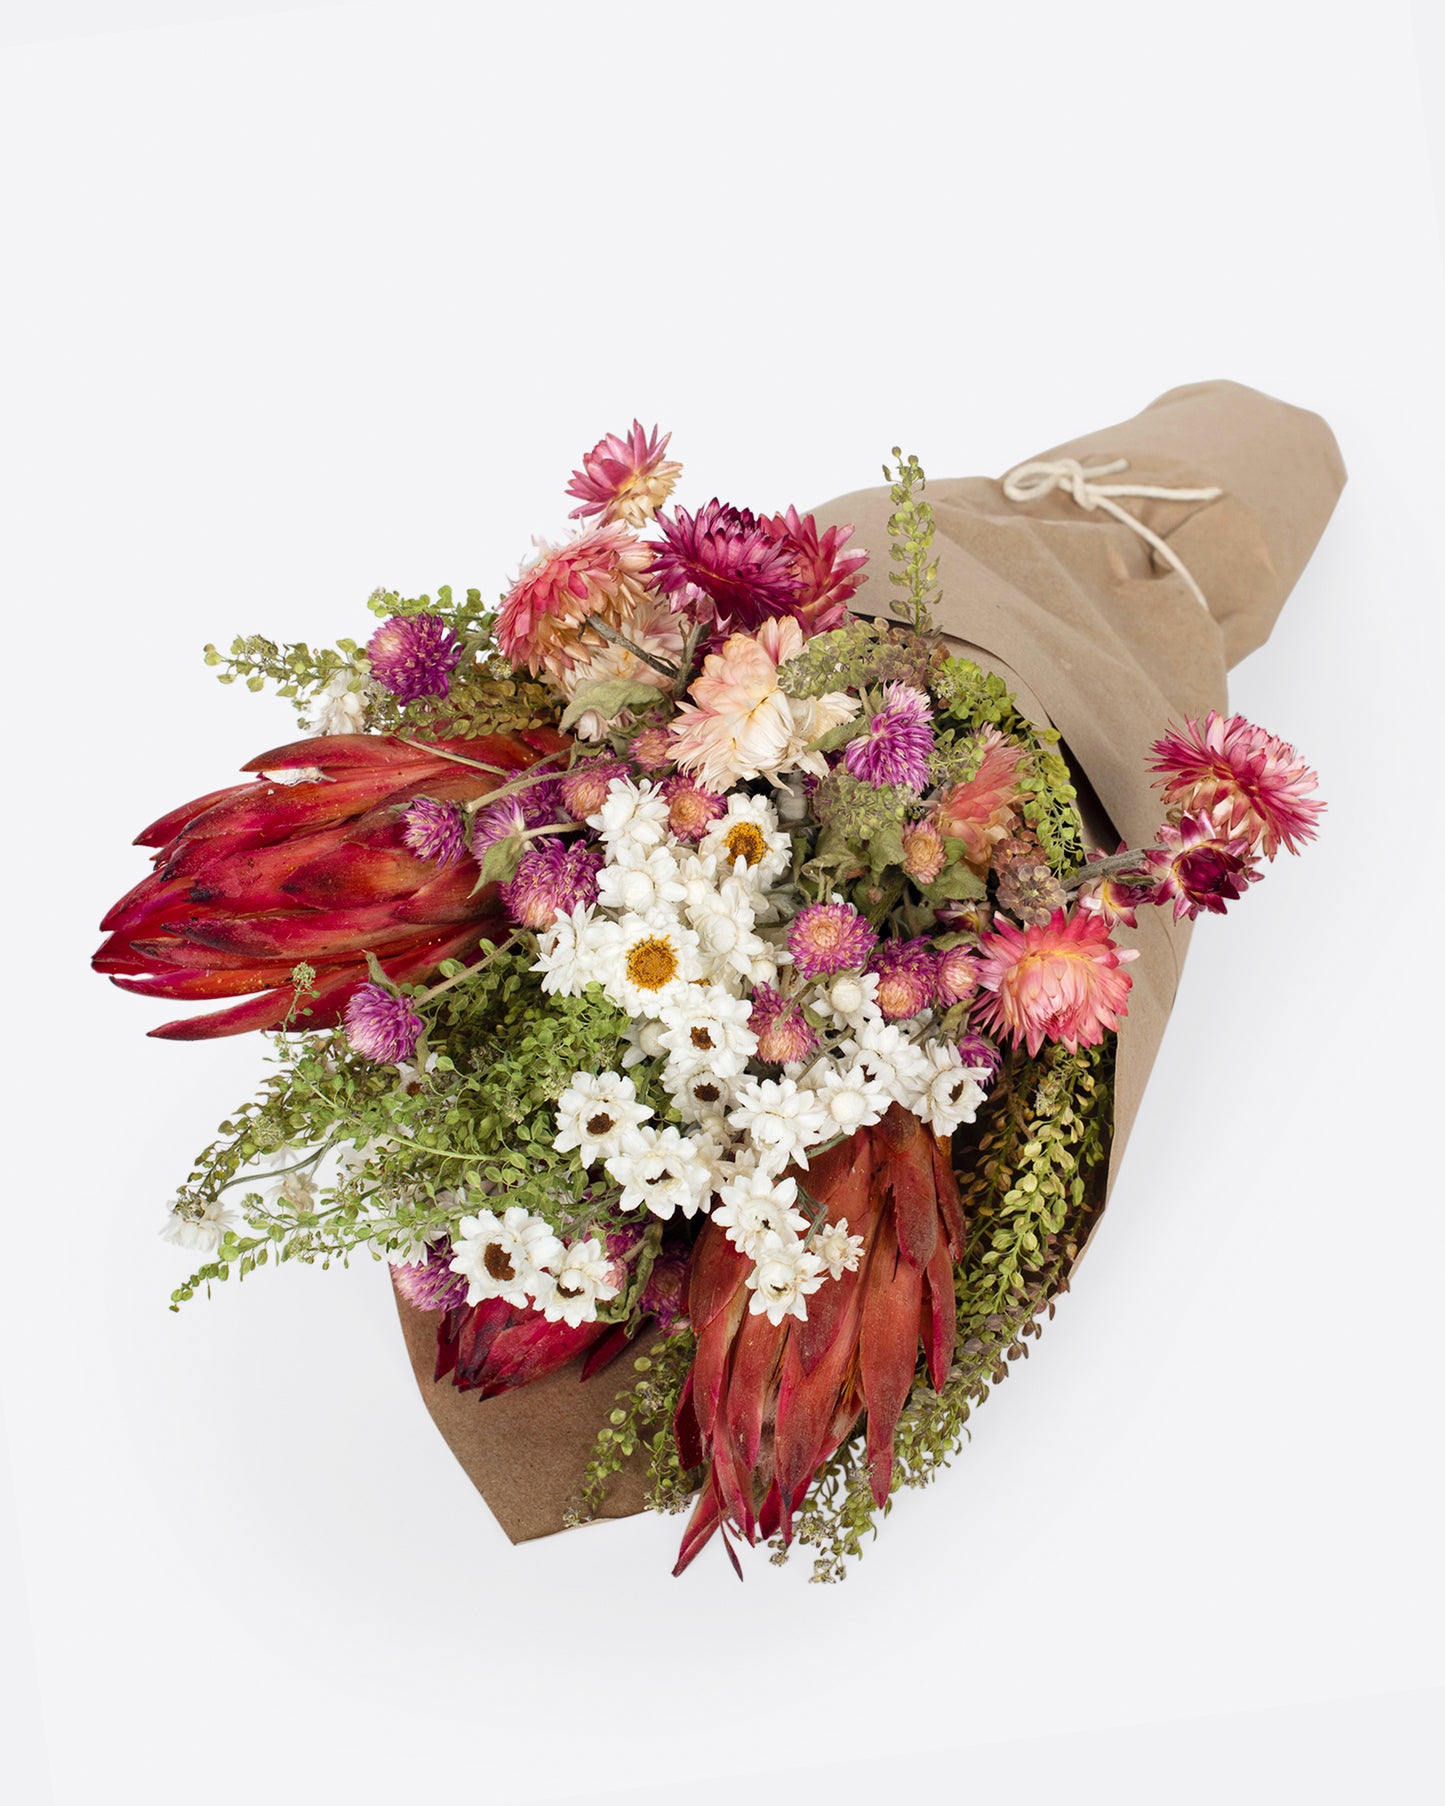 A dried flower bouquet in assorted shades of pink, white, and red.